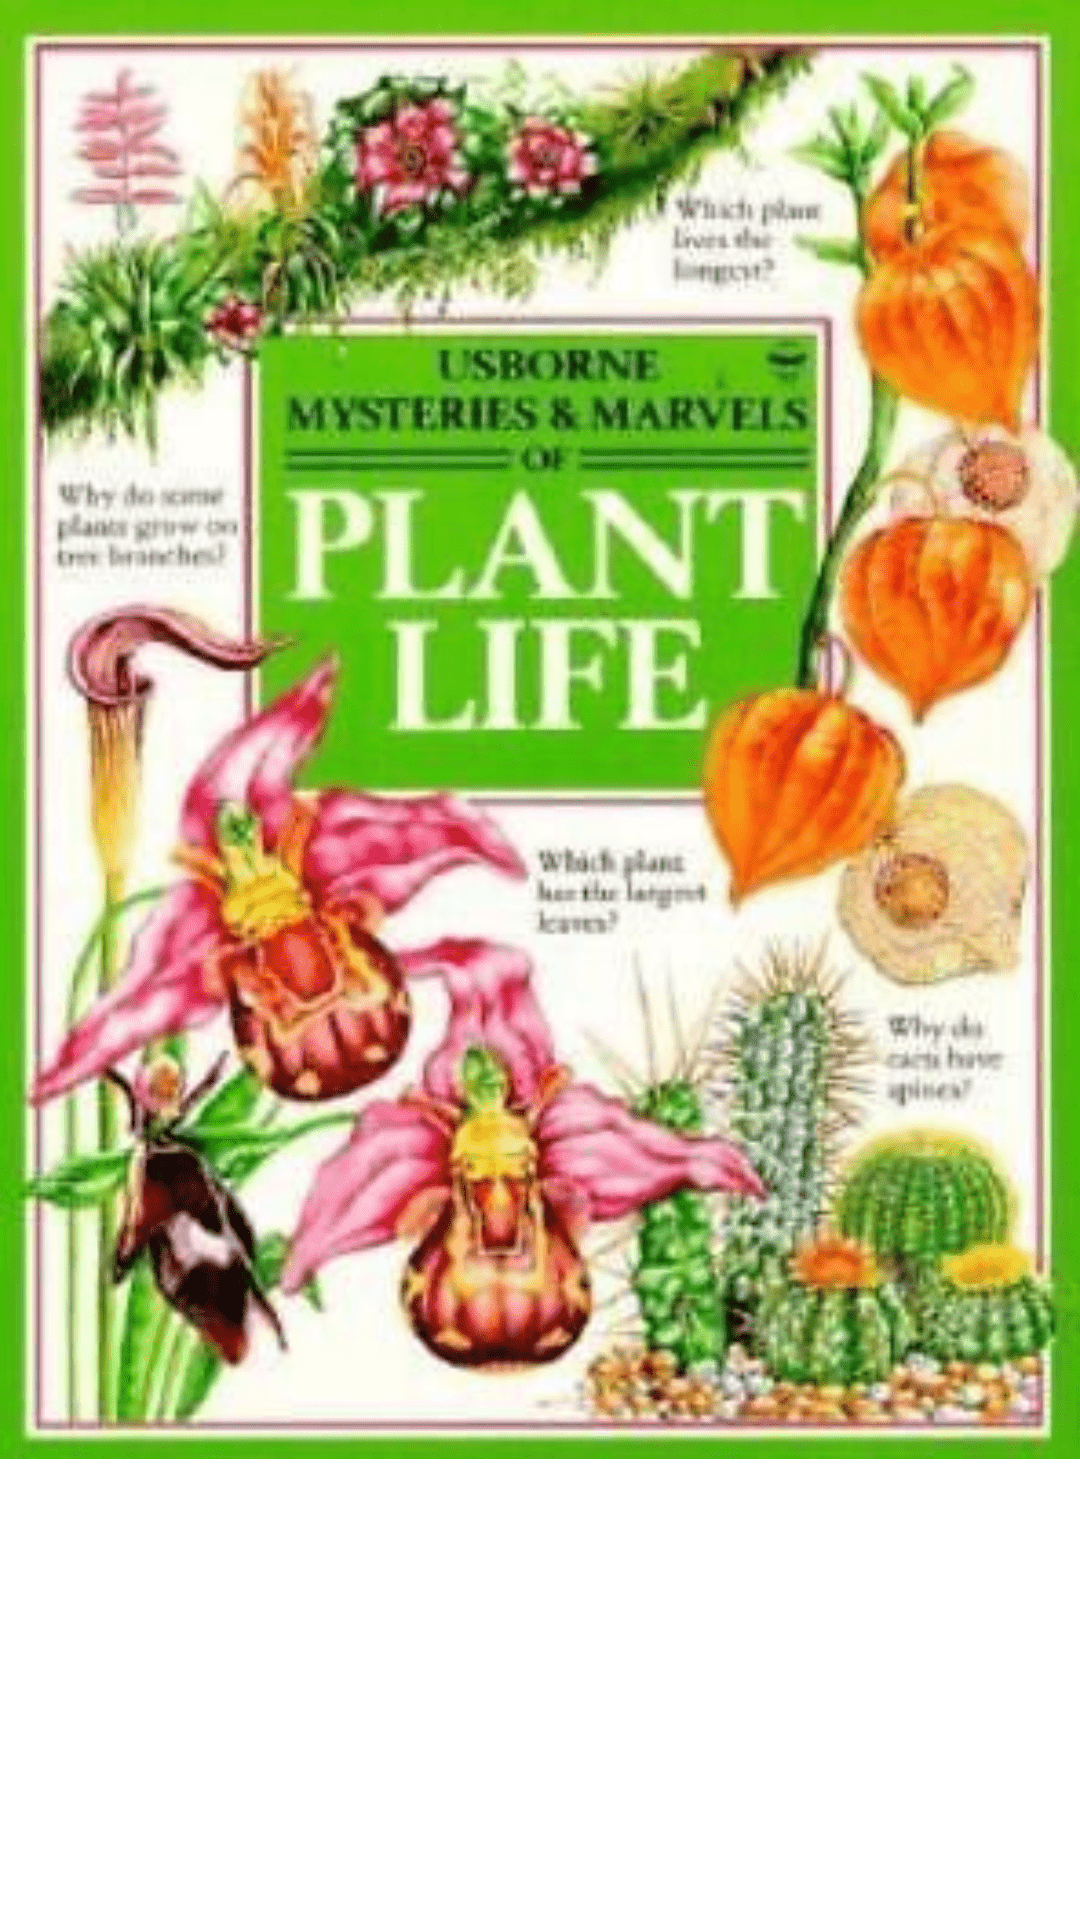 Mysteries and Marvels of Plant Life